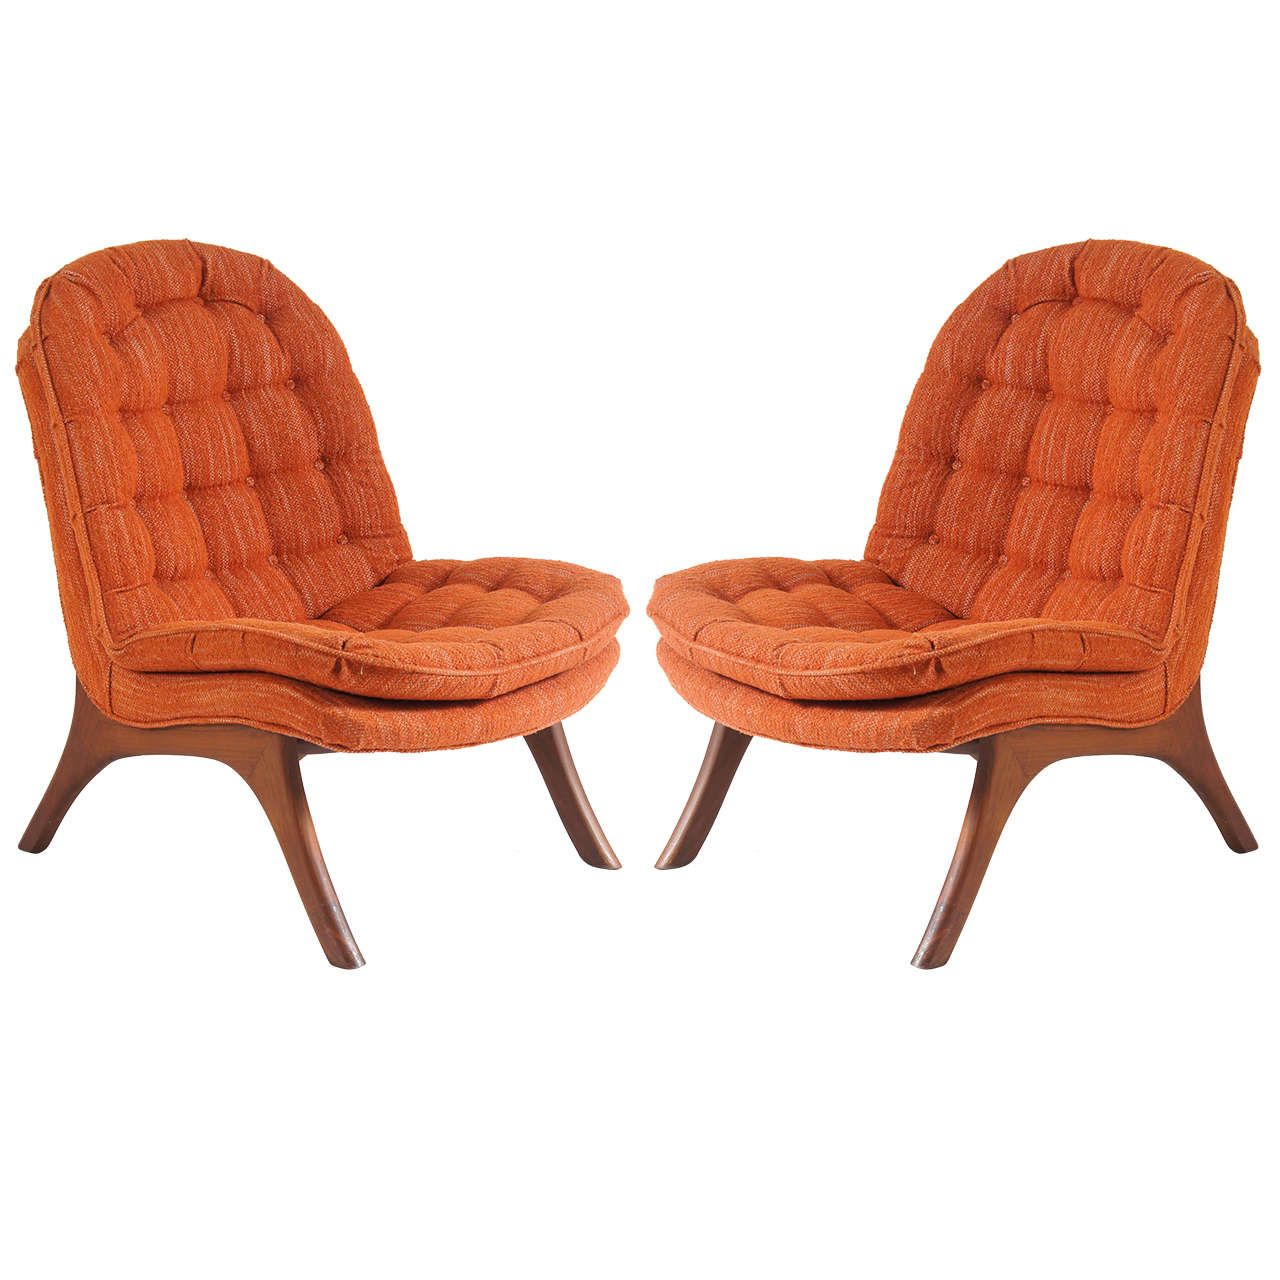 pair of slipper chairs For Sale